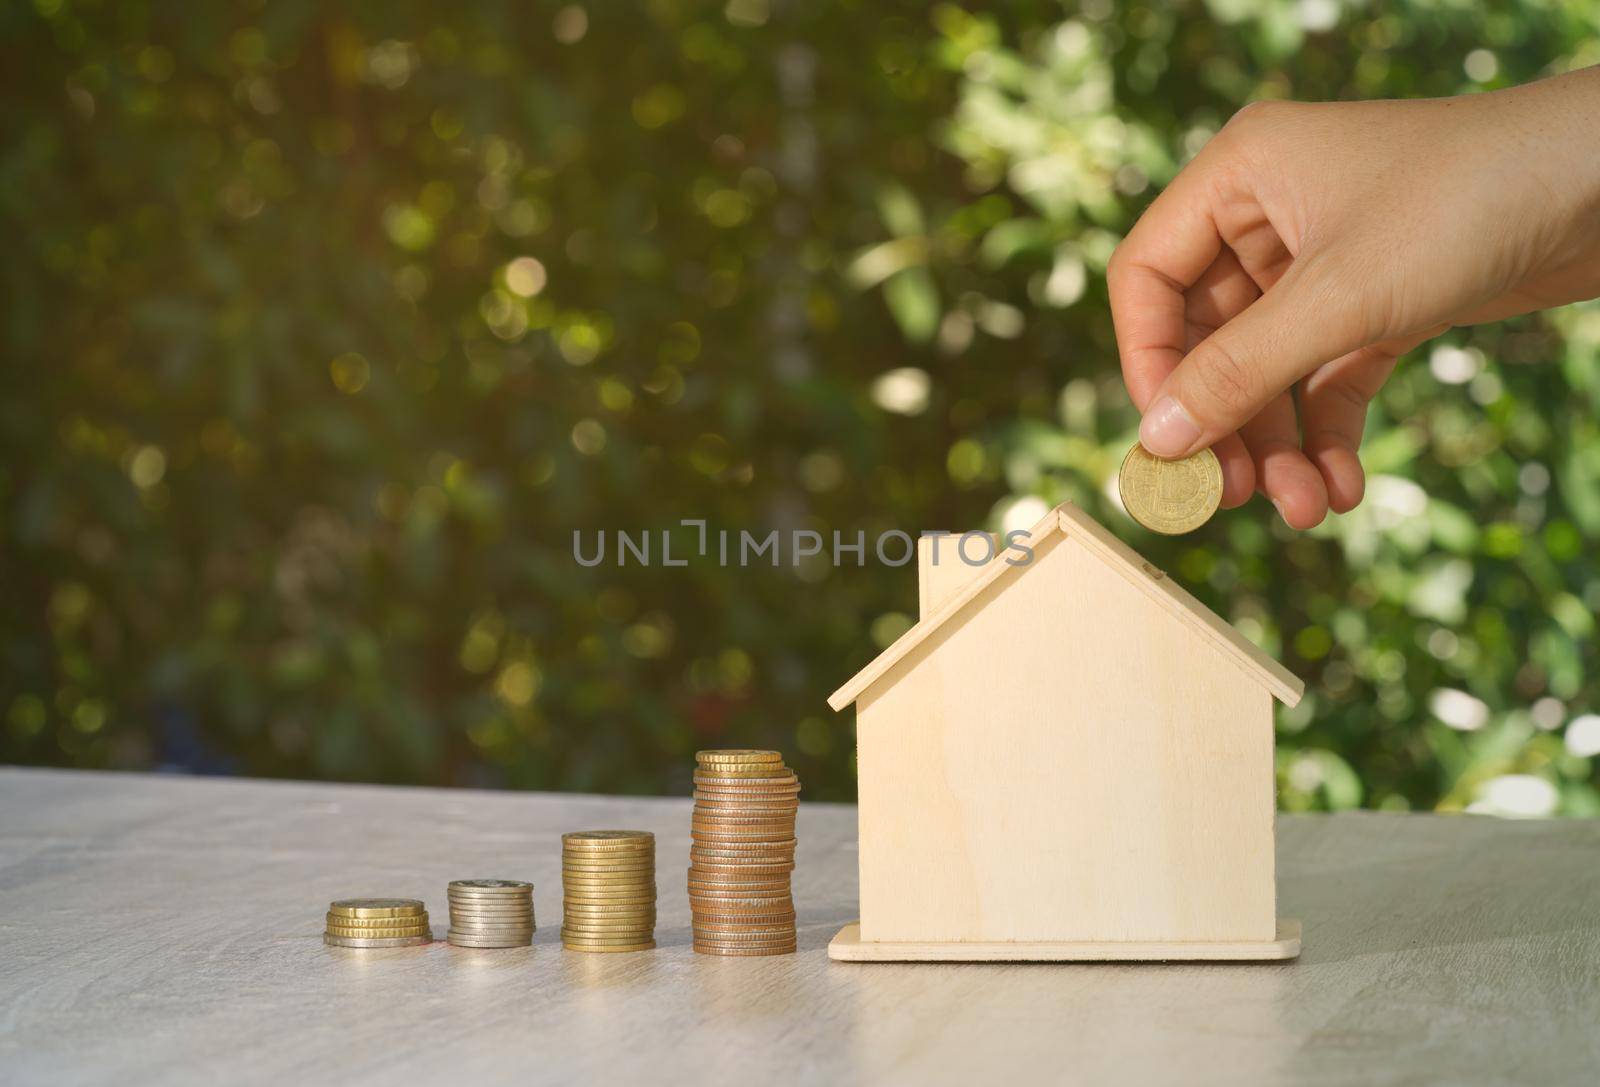 Abstract hand coin piggy bank house mockup concept auction real estate investment value, financial investment wealth, and business income growth. by noppha80